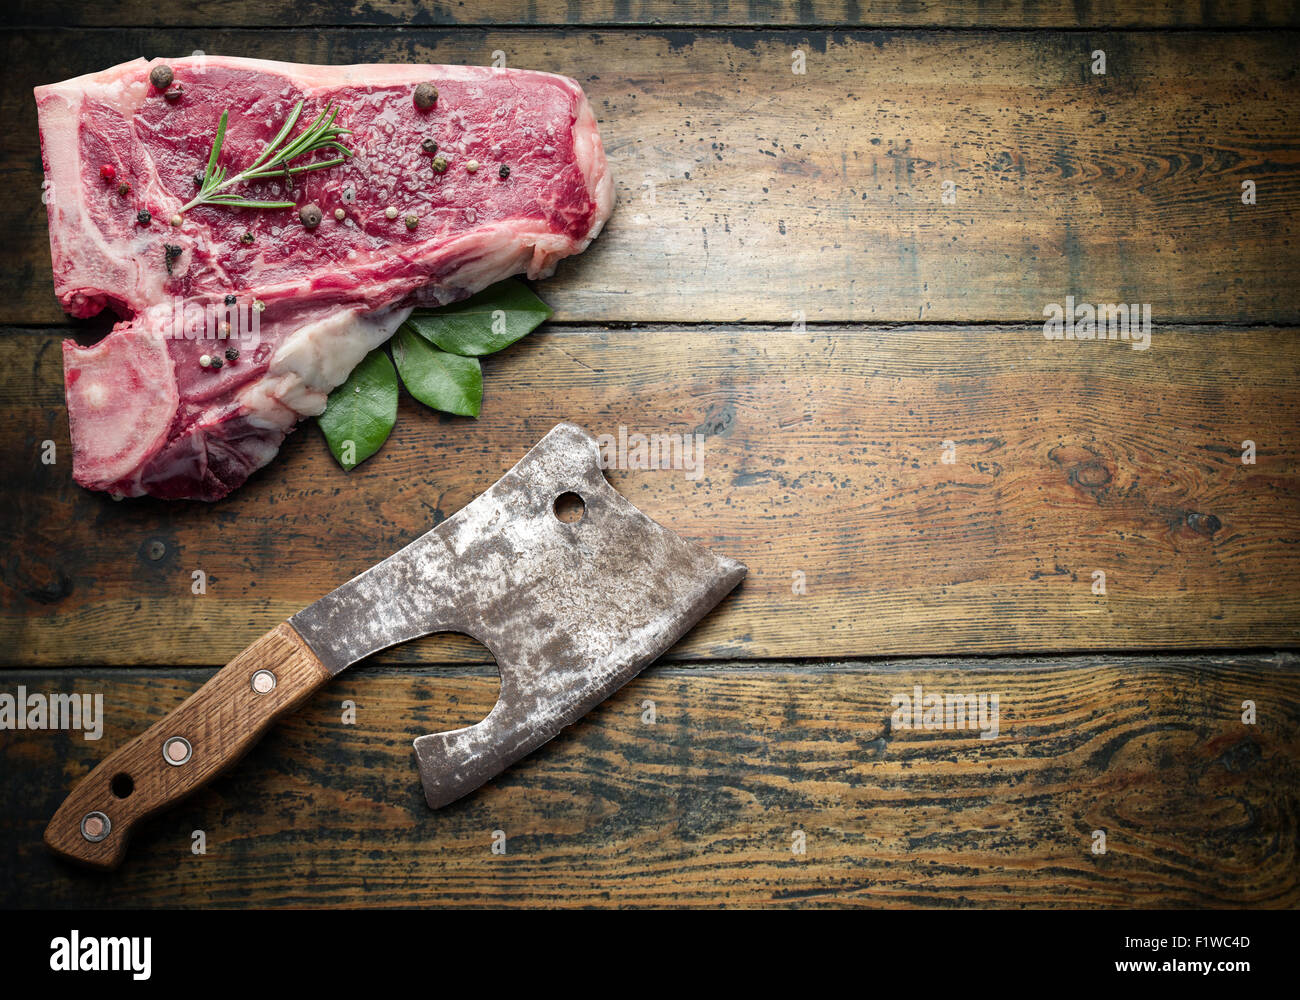 Raw beef steak with spices and meat hatchet on a wooden board. Stock Photo